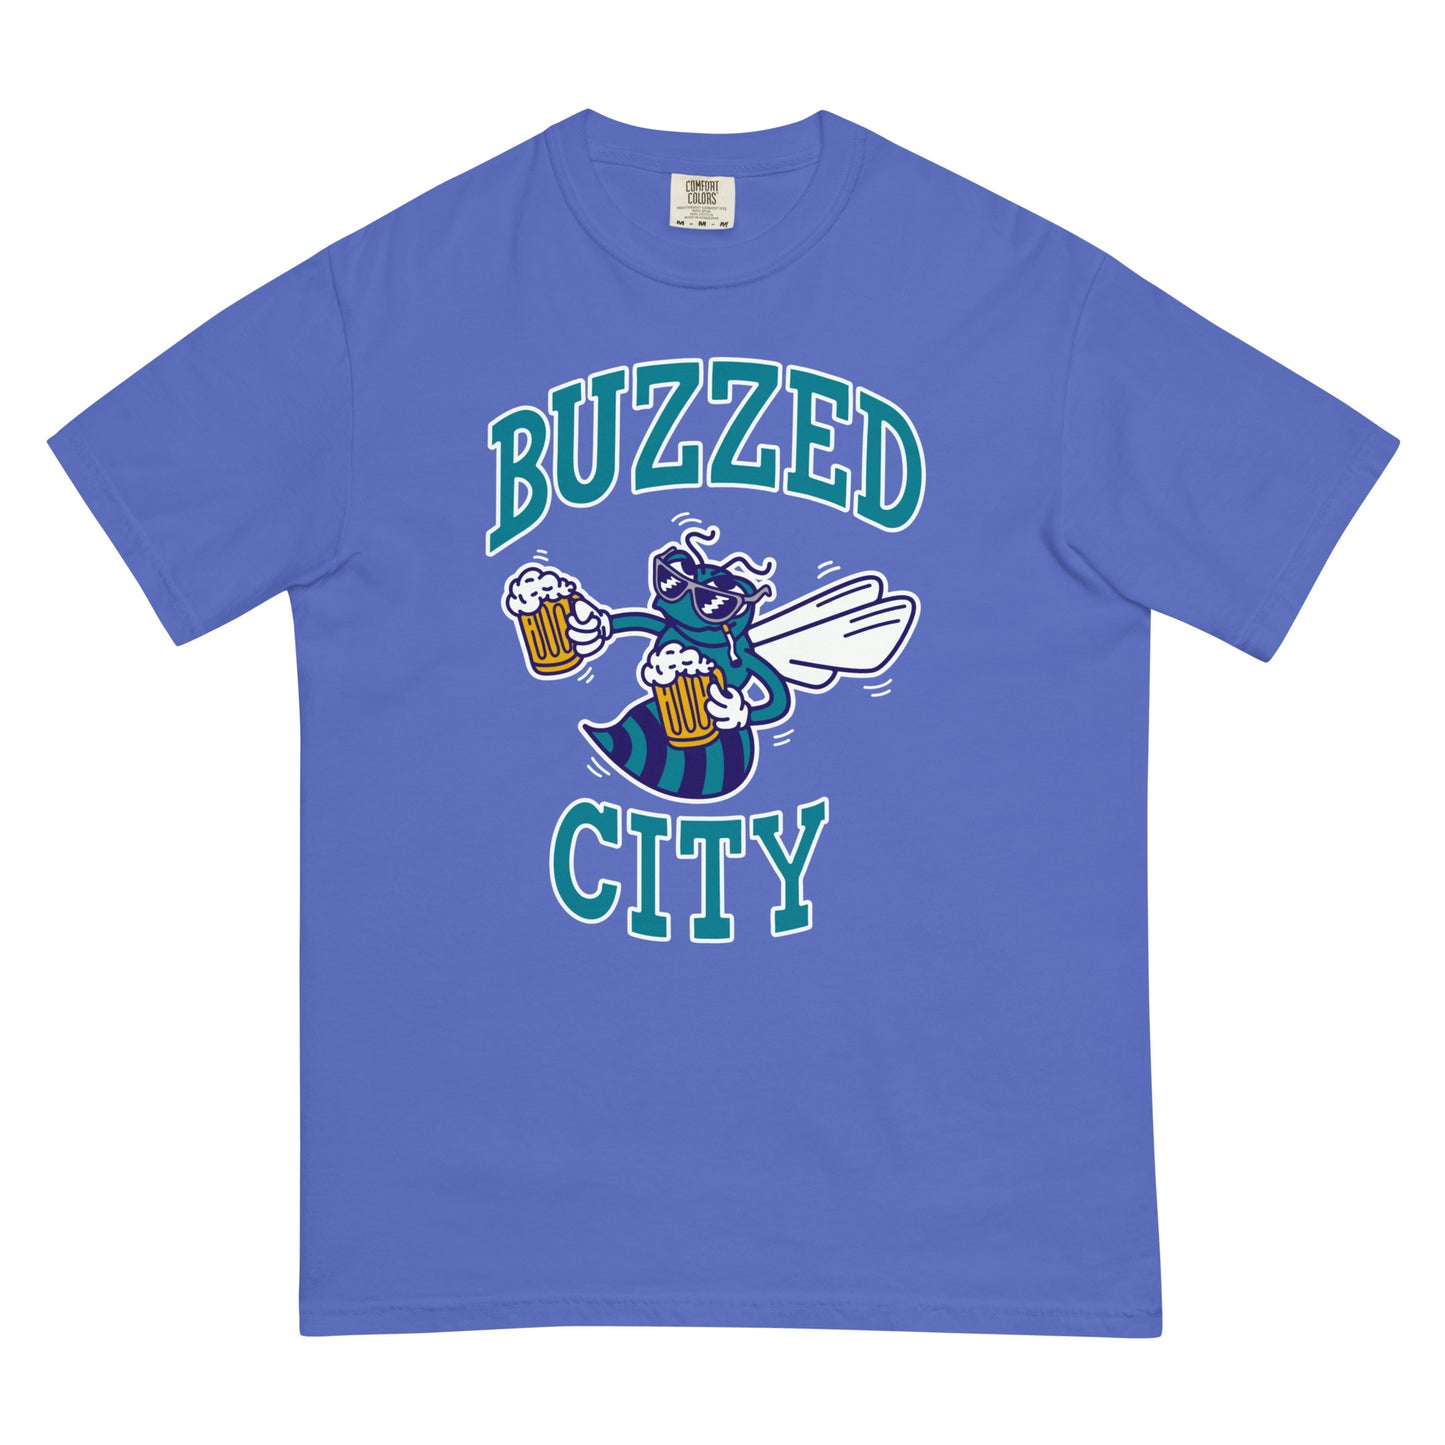 Buzzed City Teal Front